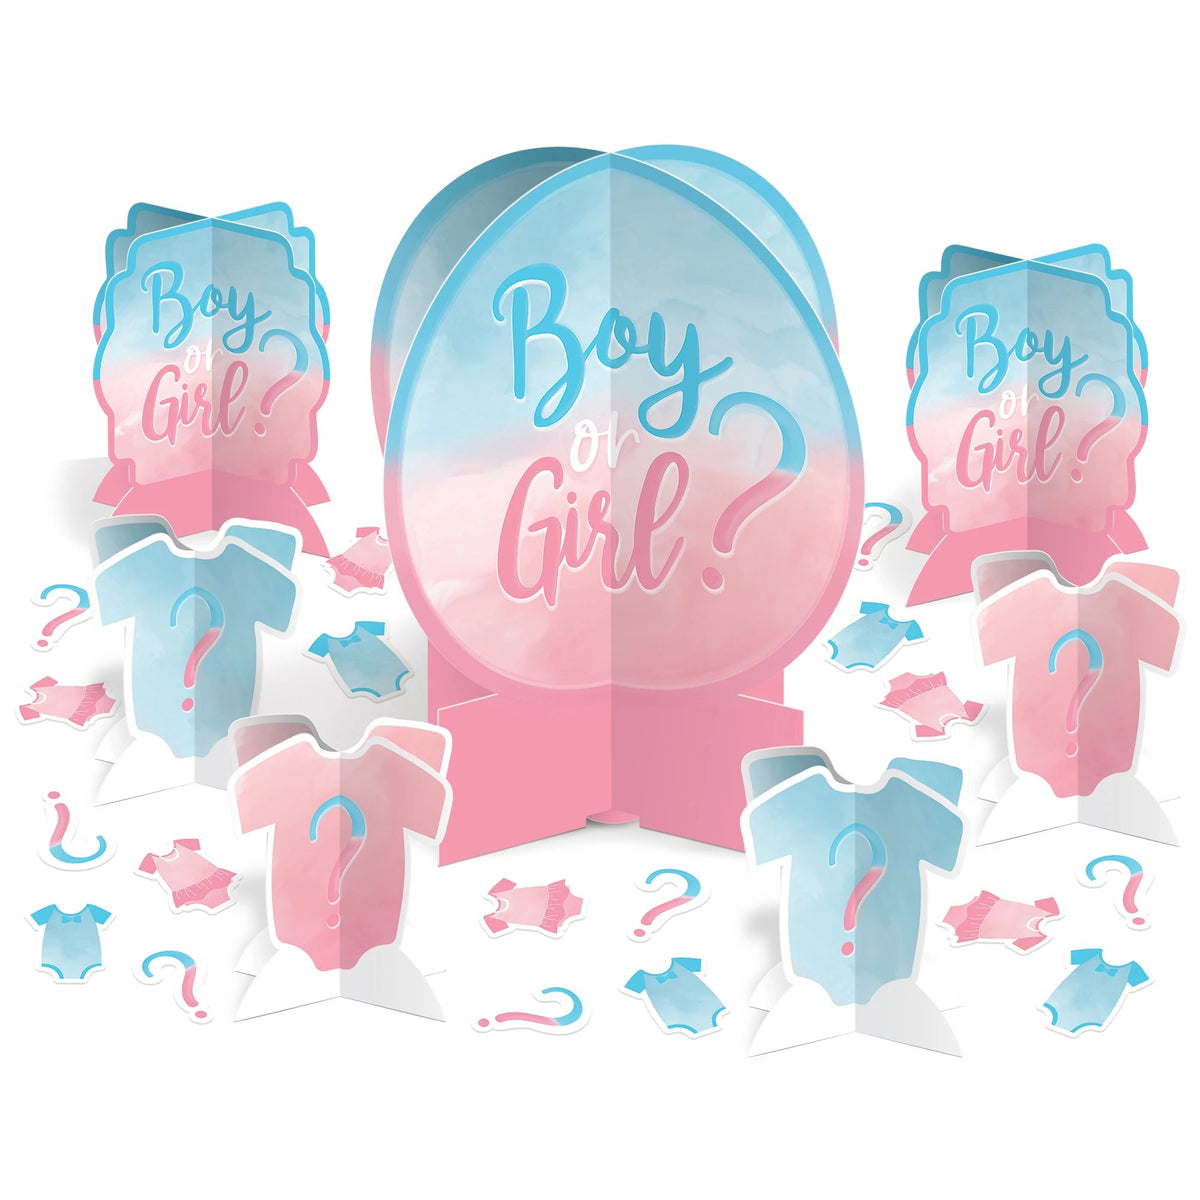 Boy or Girl Table Decorating 7 piece Kit